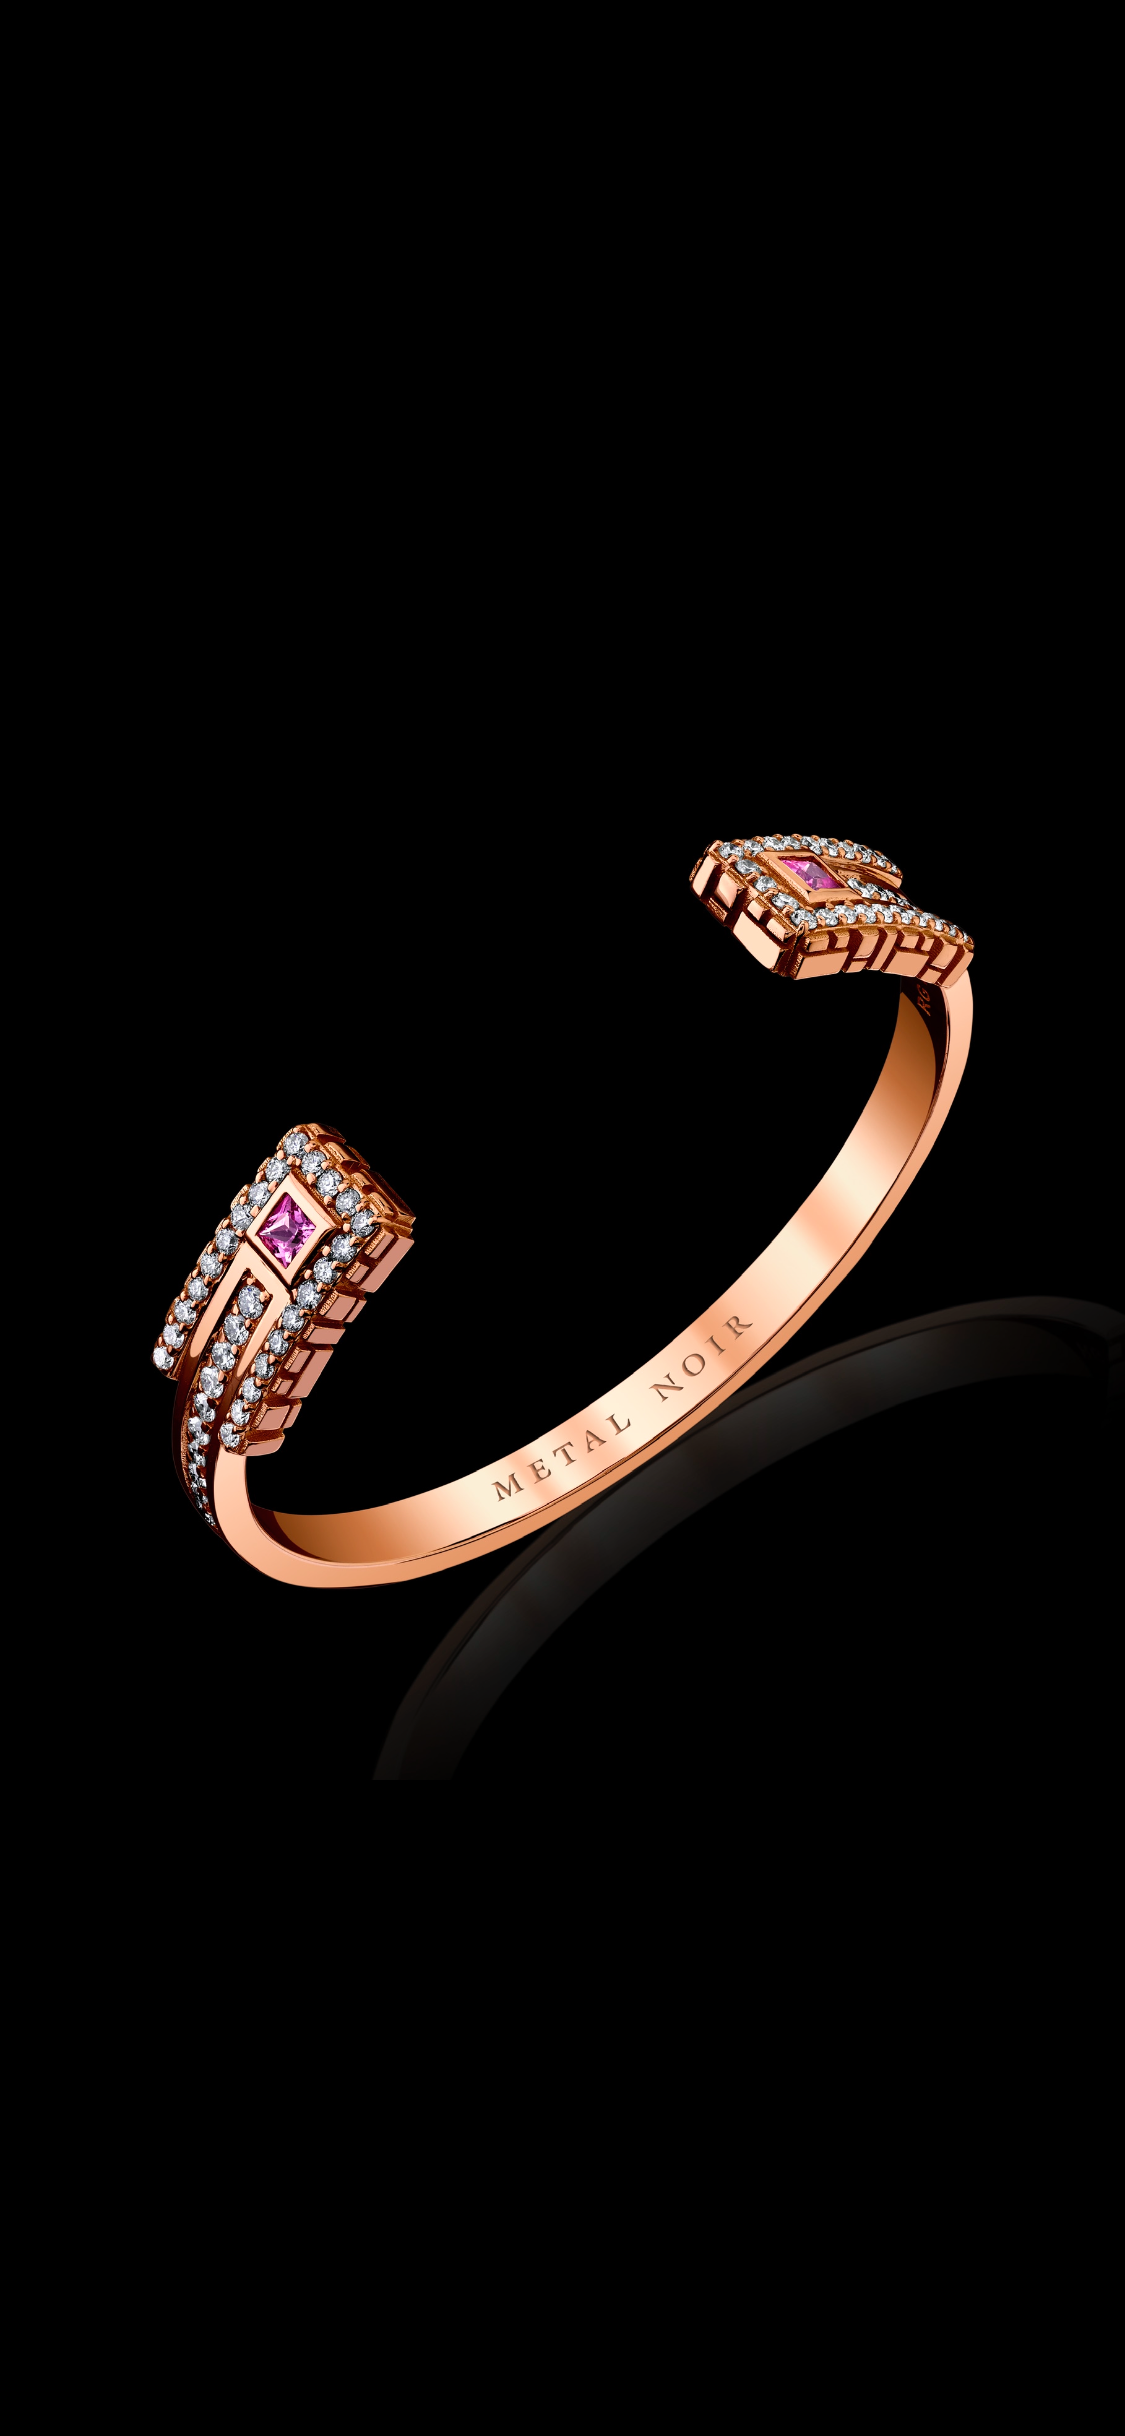 Signature Collection Cuff Bracelet with Diamonds + Pink Sapphires